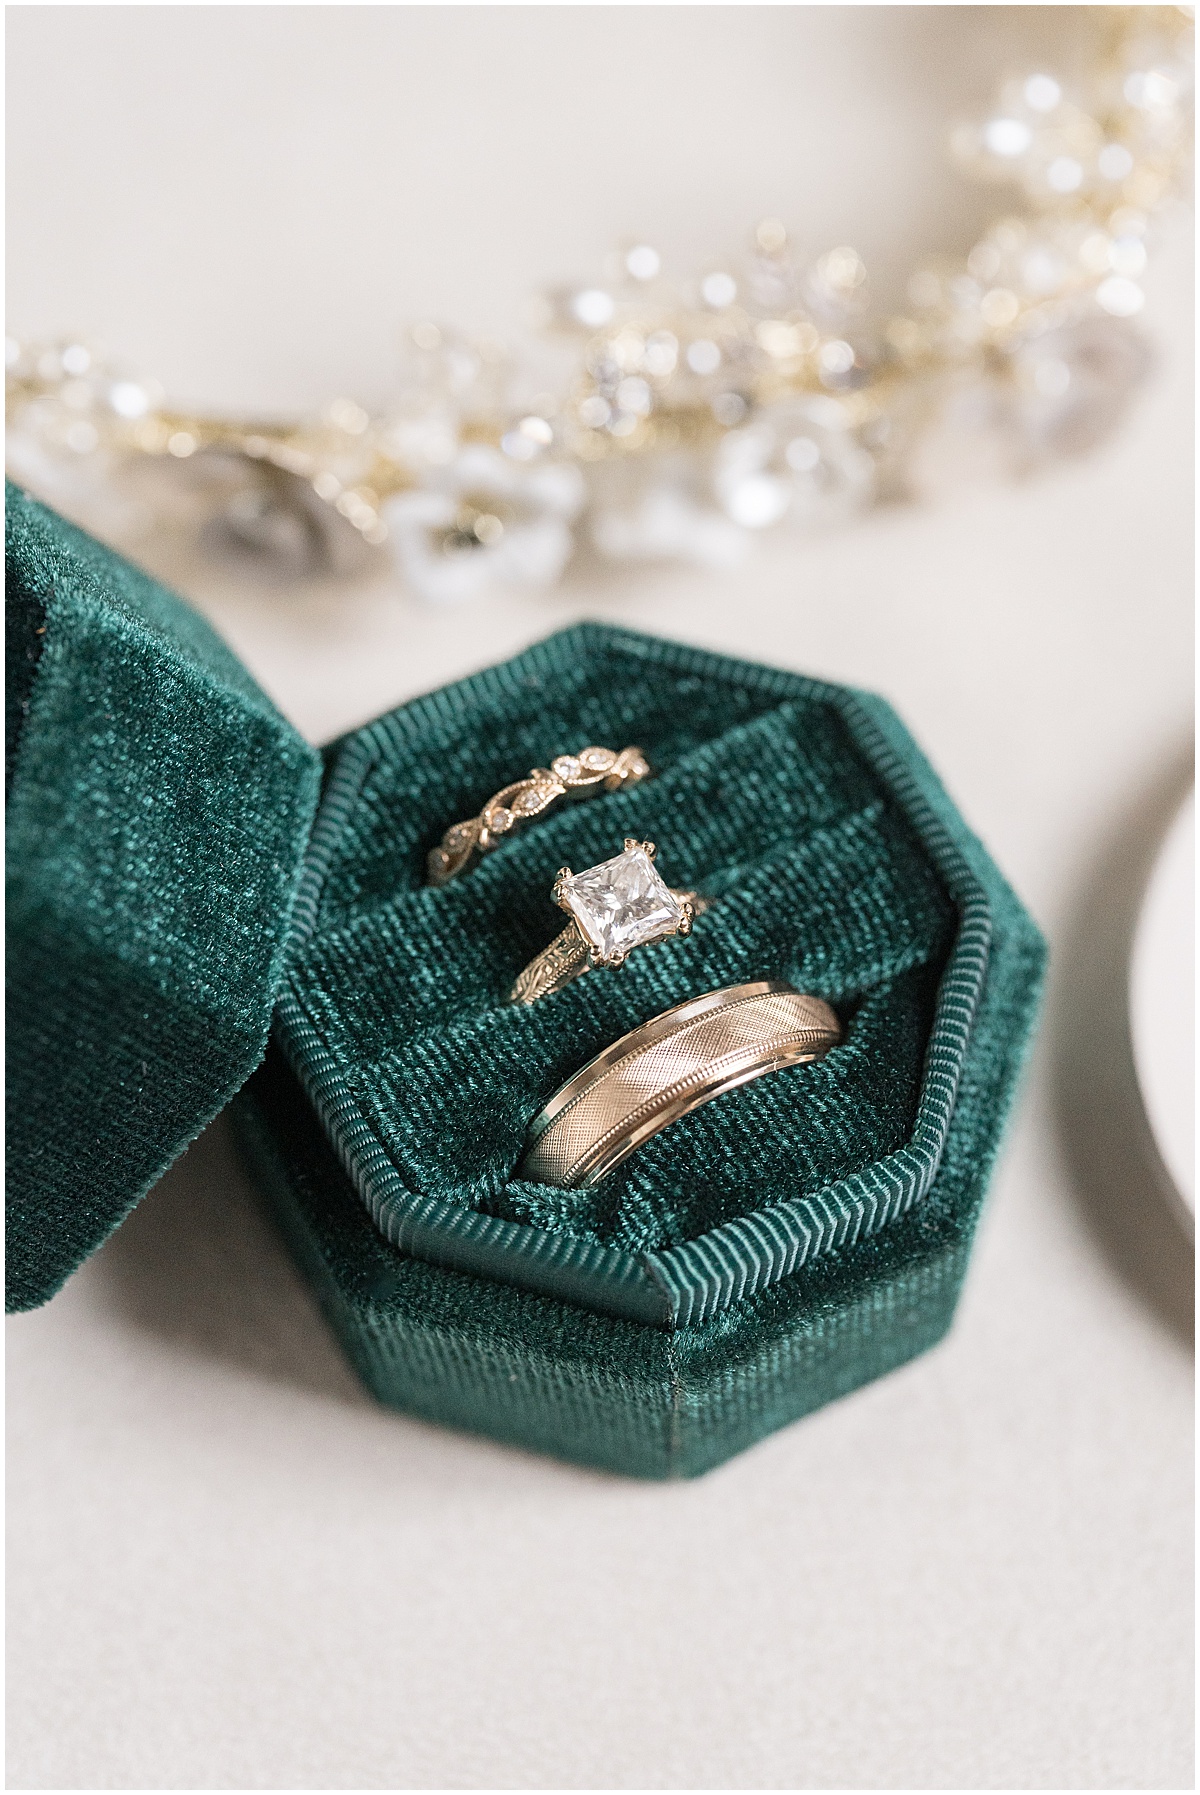 Wedding rings in green ring box for Historic Saint Joseph Hall wedding in Indianapolis